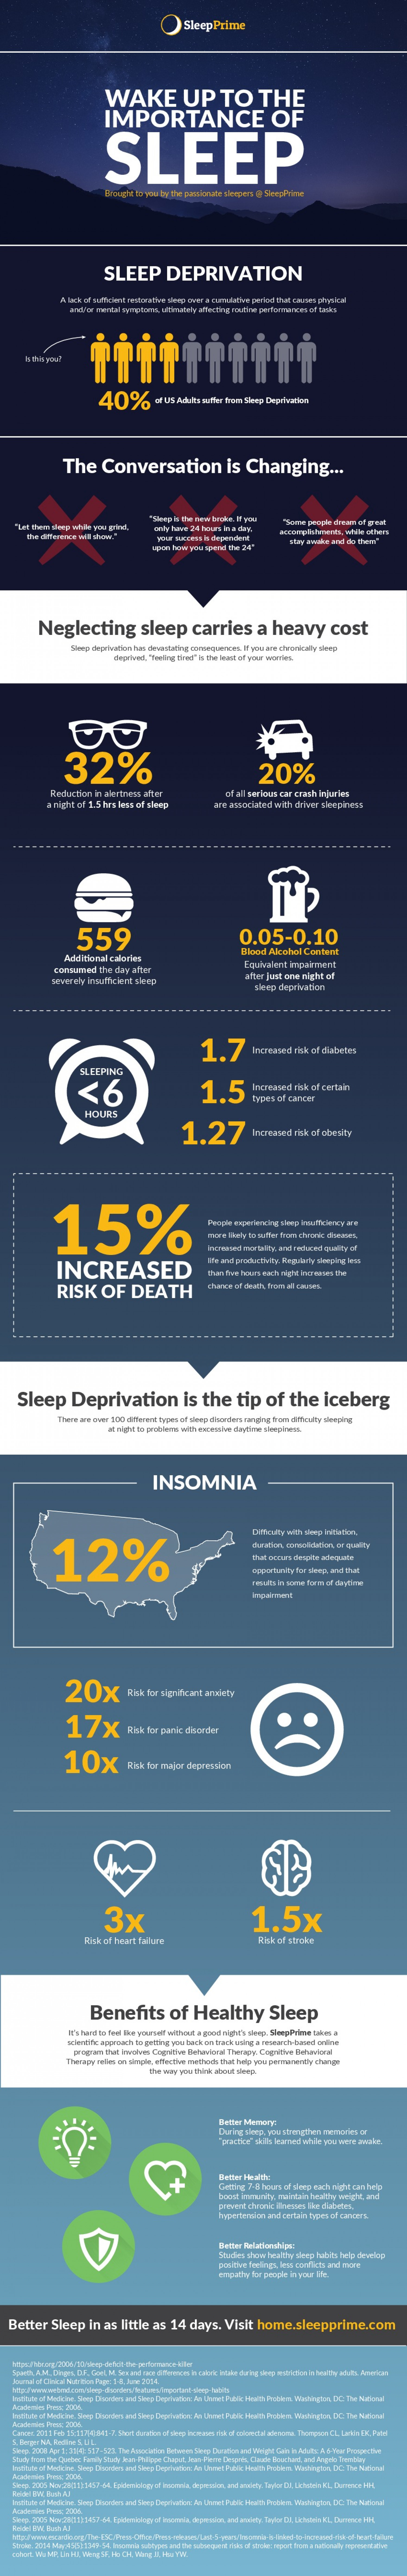 Wake Up to the Importance of Sleep Infographic